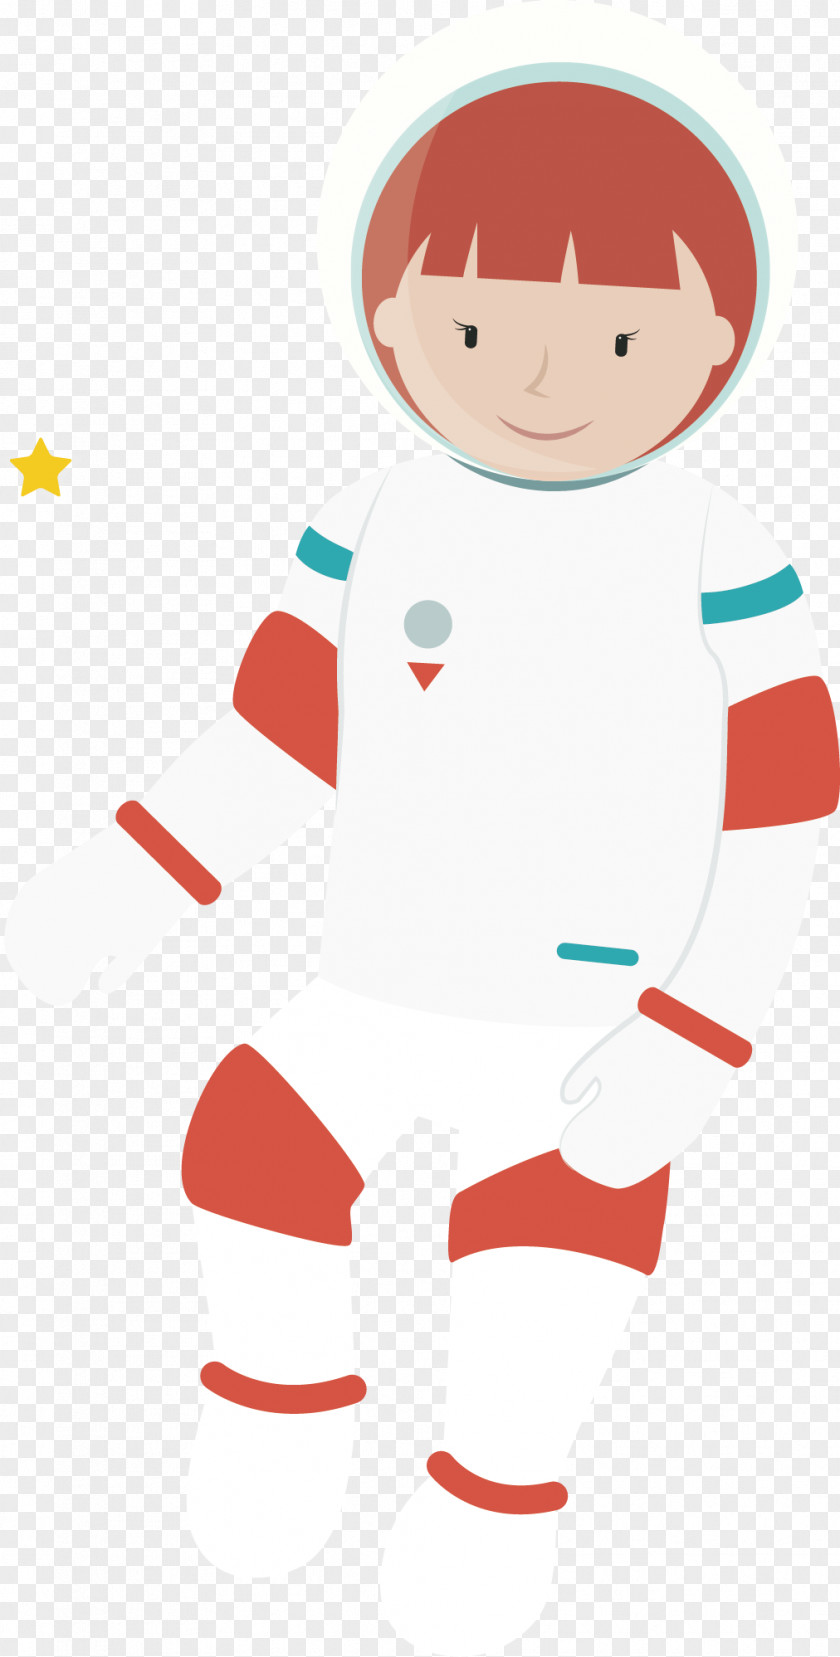 Cartoon Astronaut Unidentified Flying Object Extraterrestrials In Fiction Illustration PNG